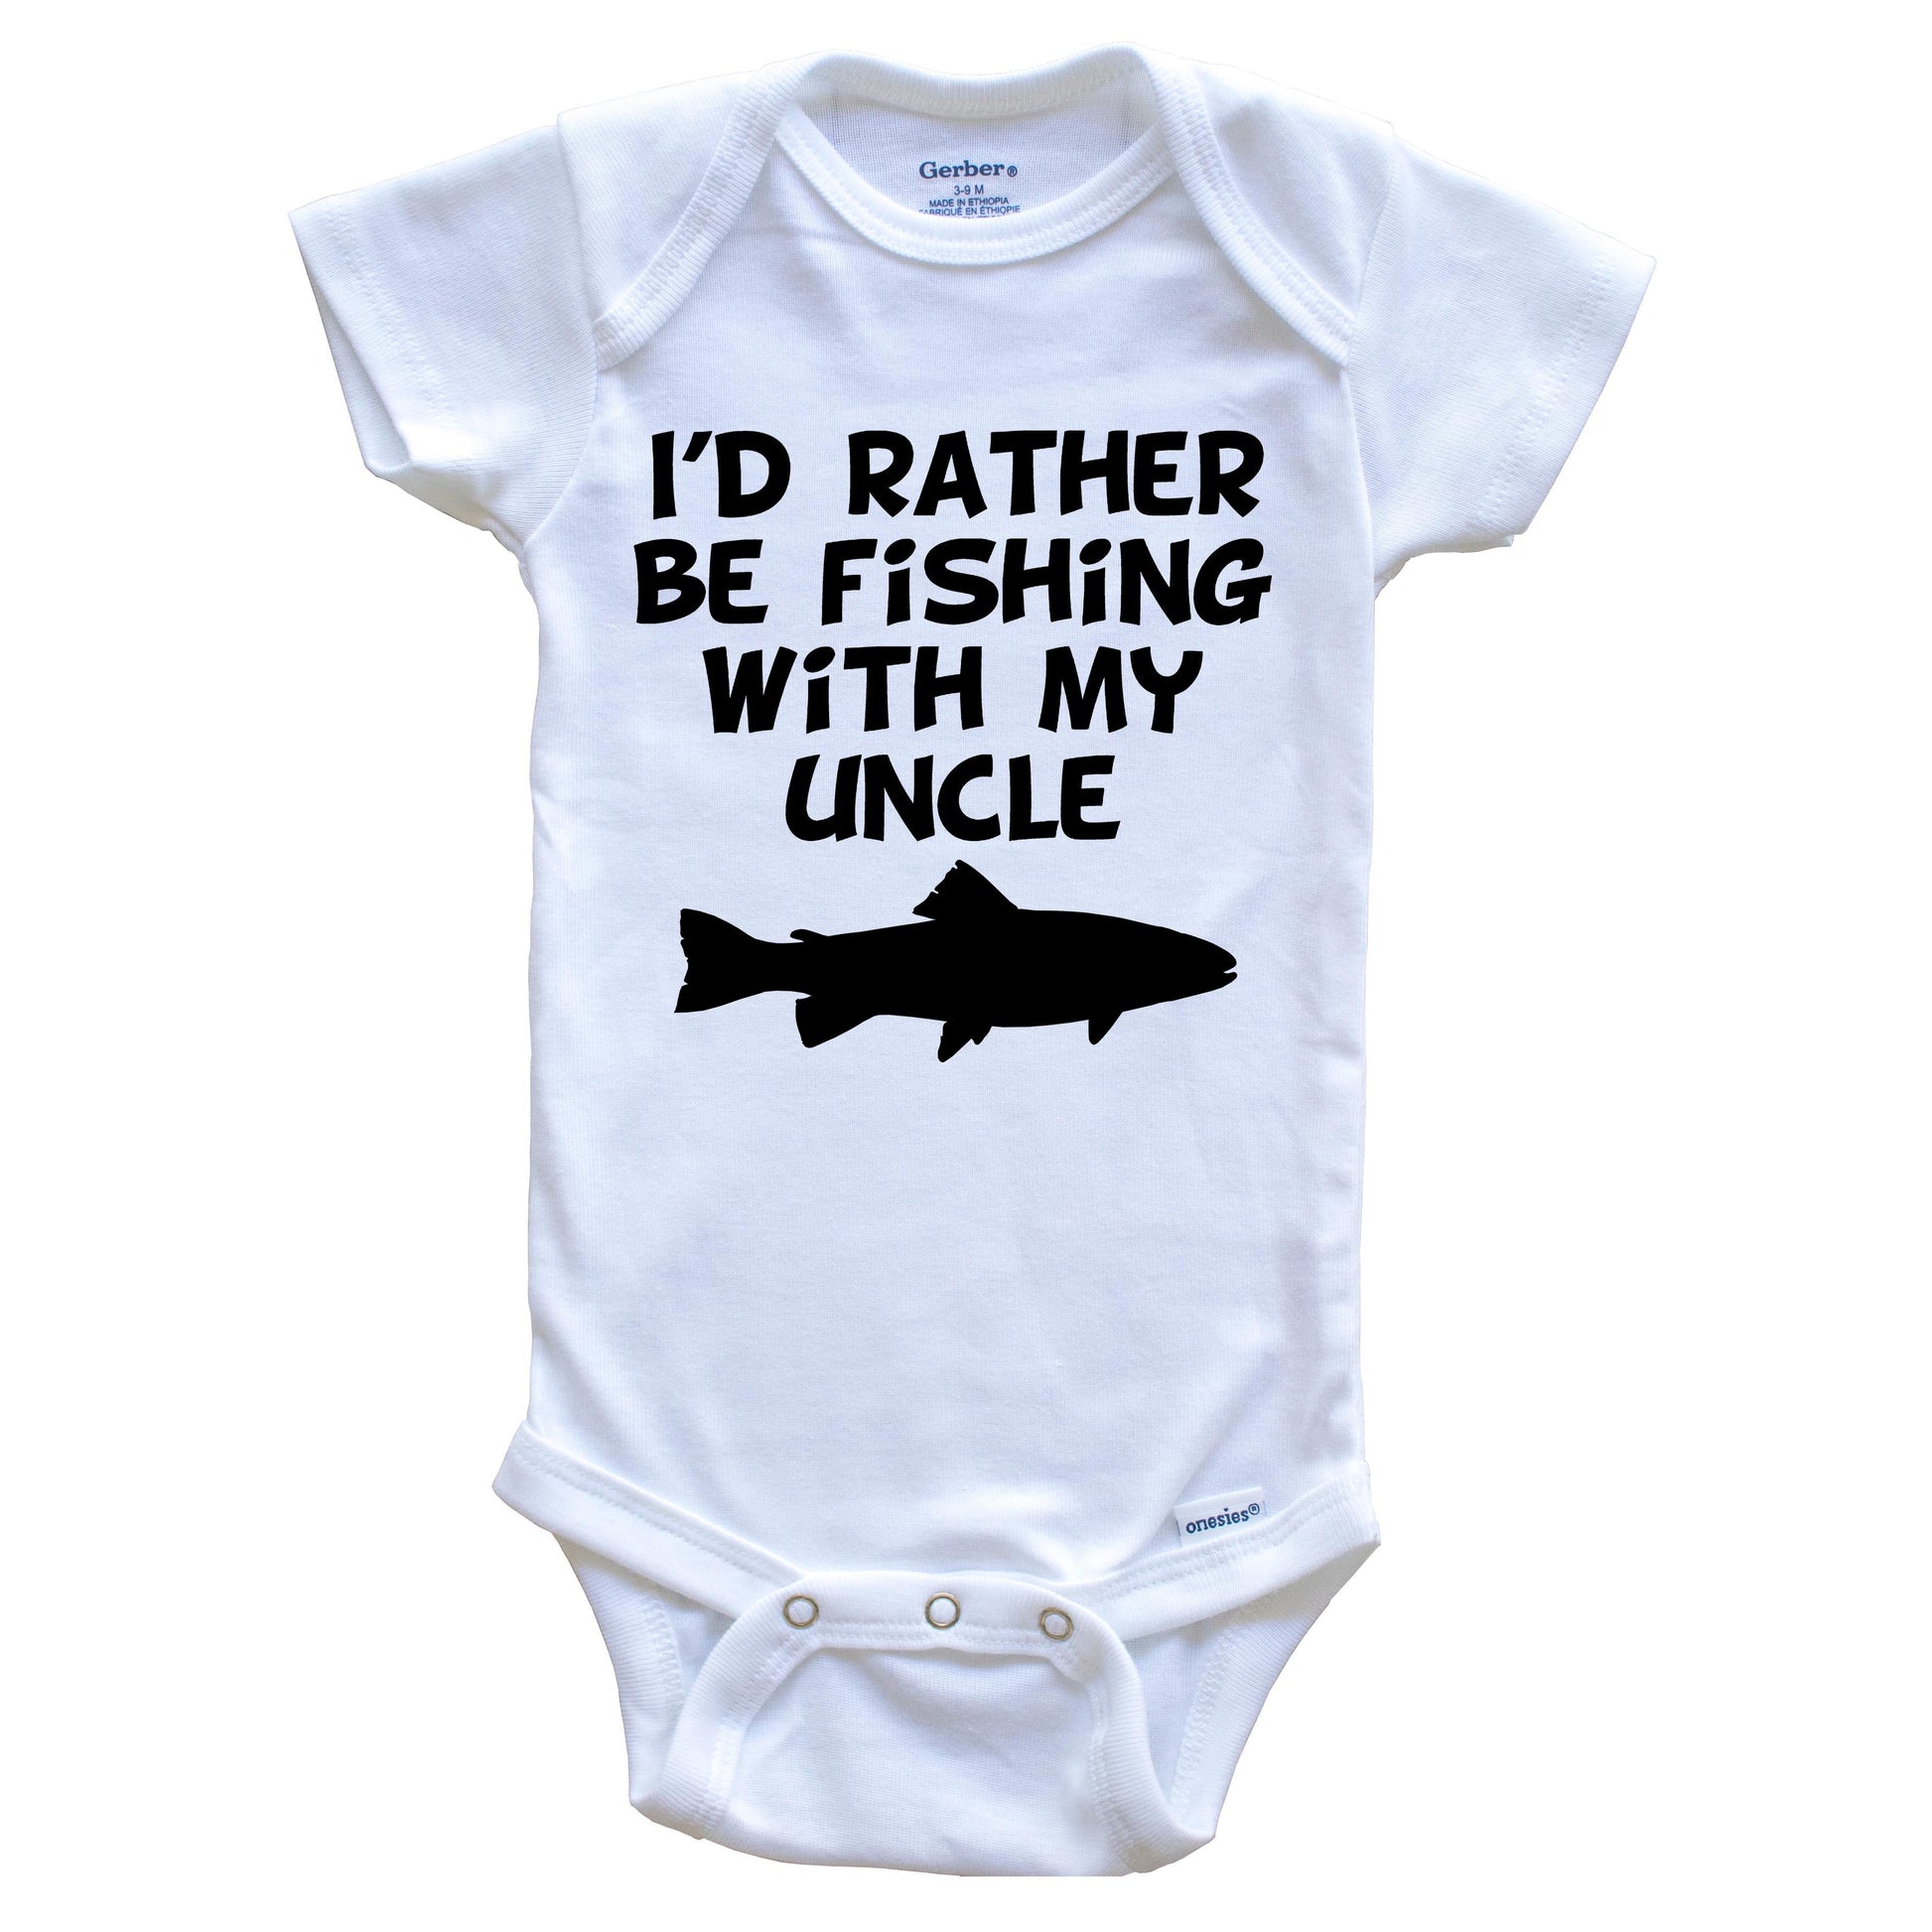 I'd Rather Be Fishing with My Uncle Baby Onesie 3-6 Months / White